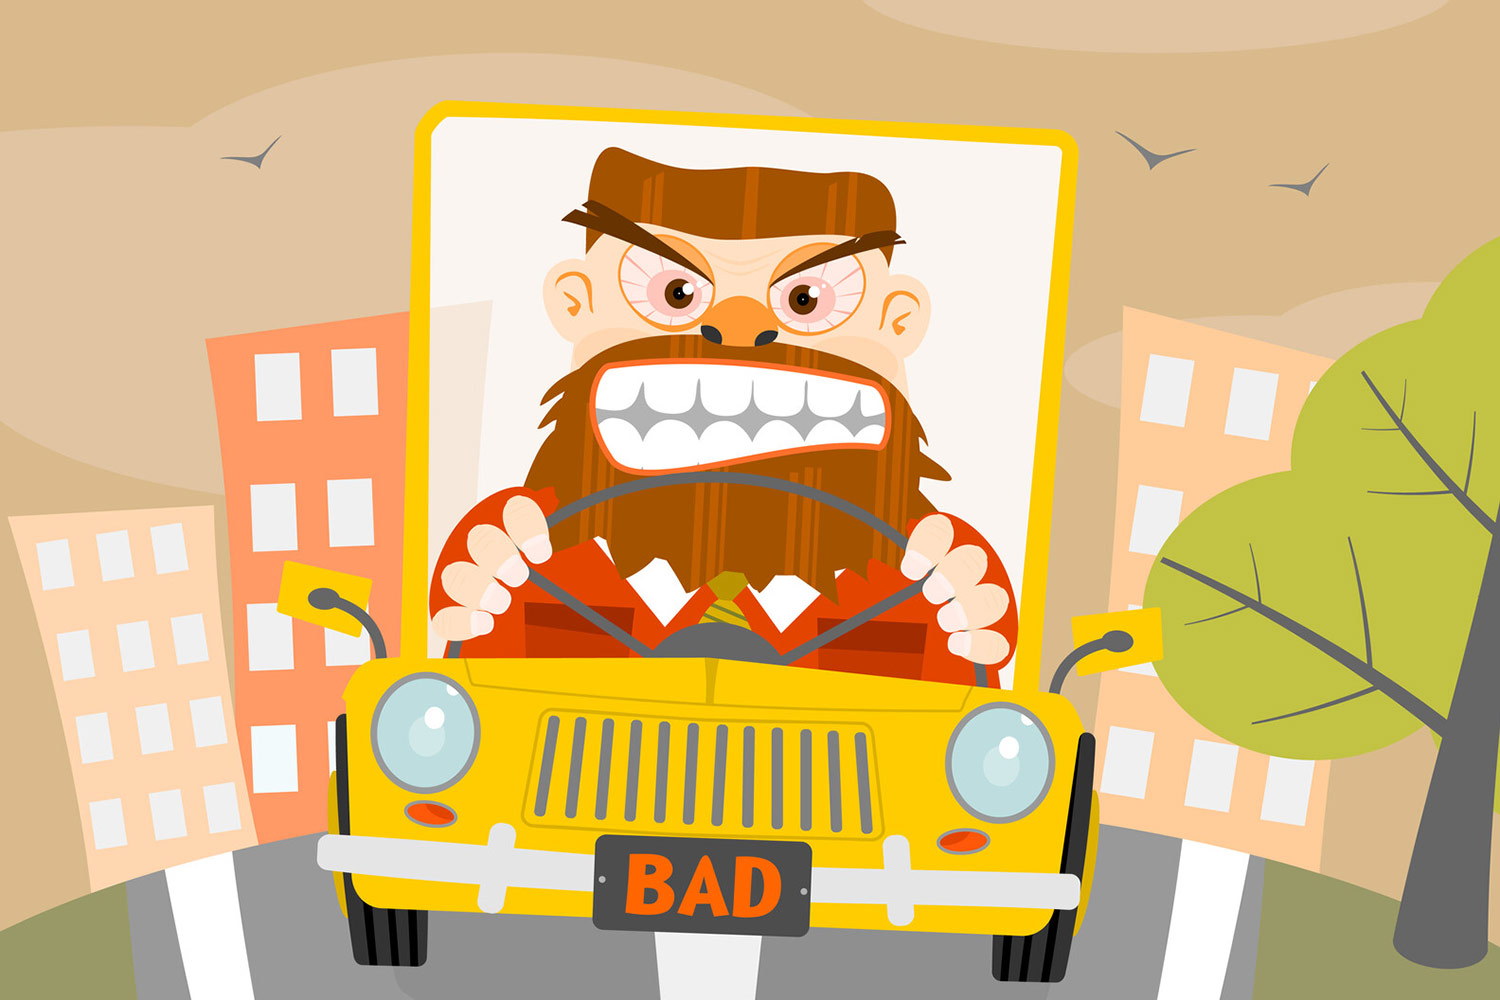 Signs of Road Rage